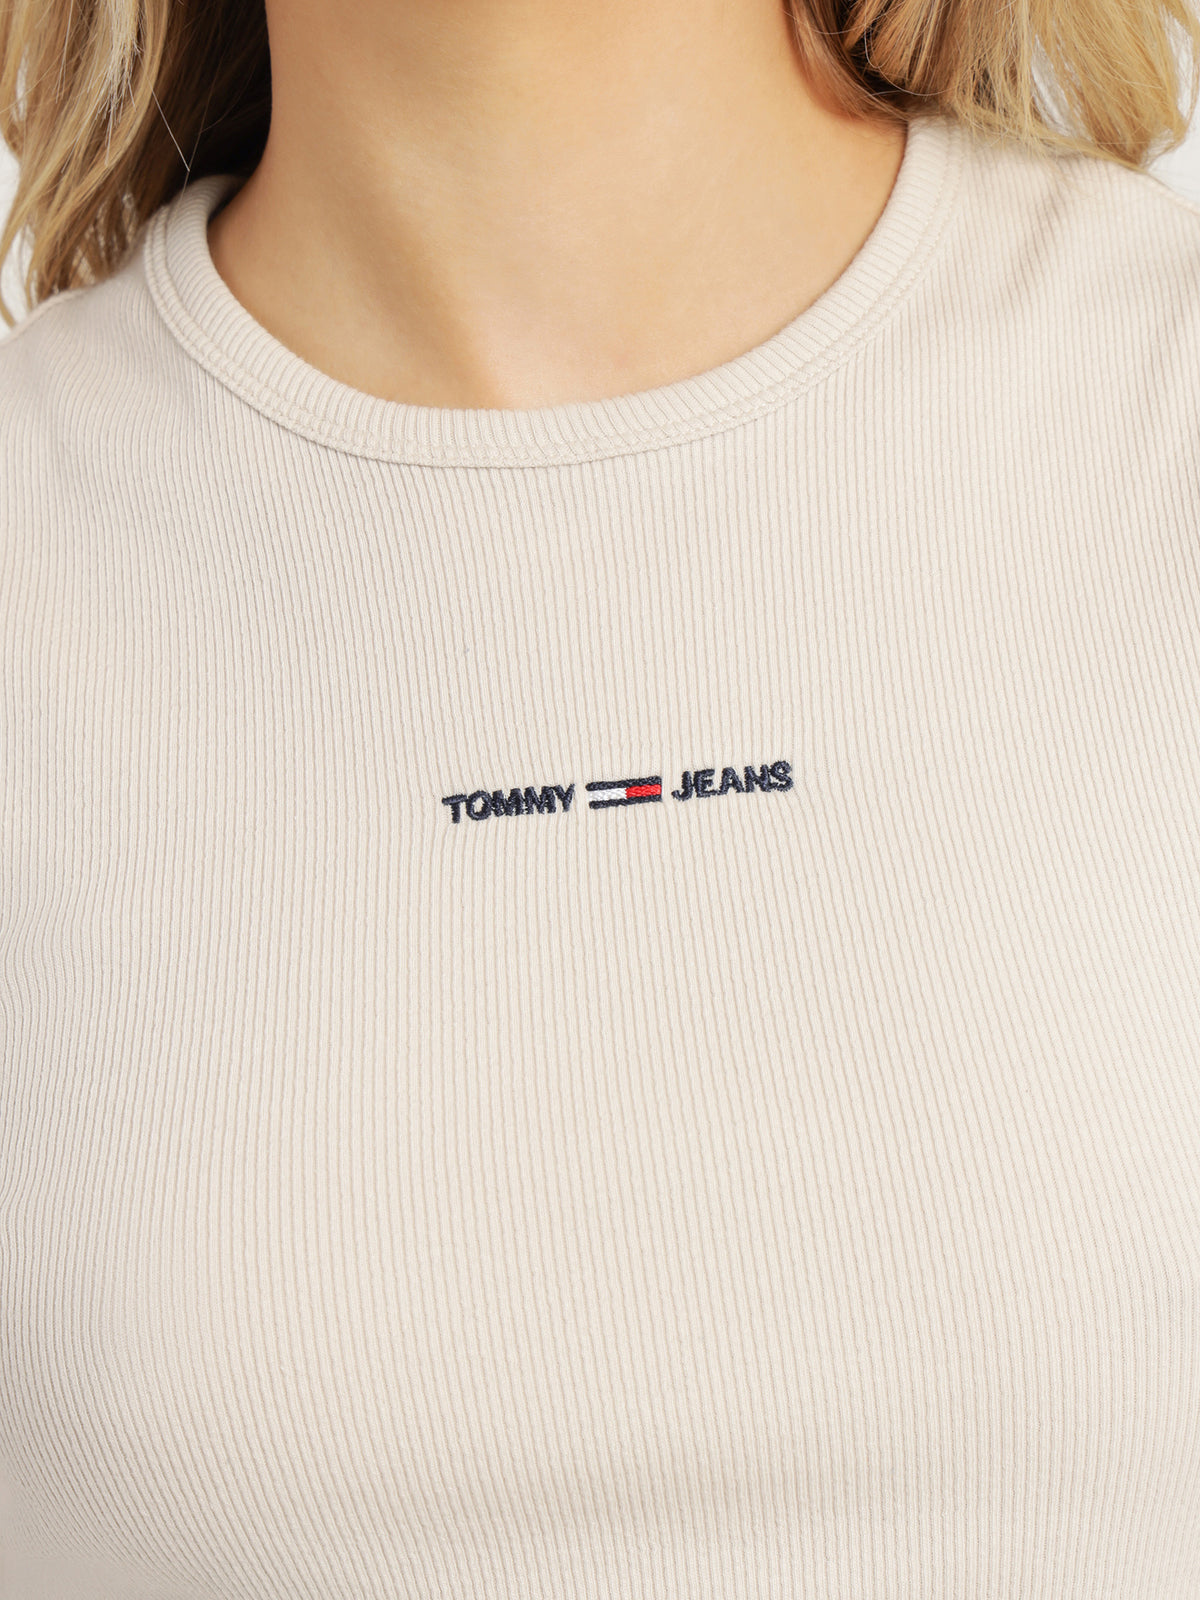 Crop Tiny Tommy Tank in Stone